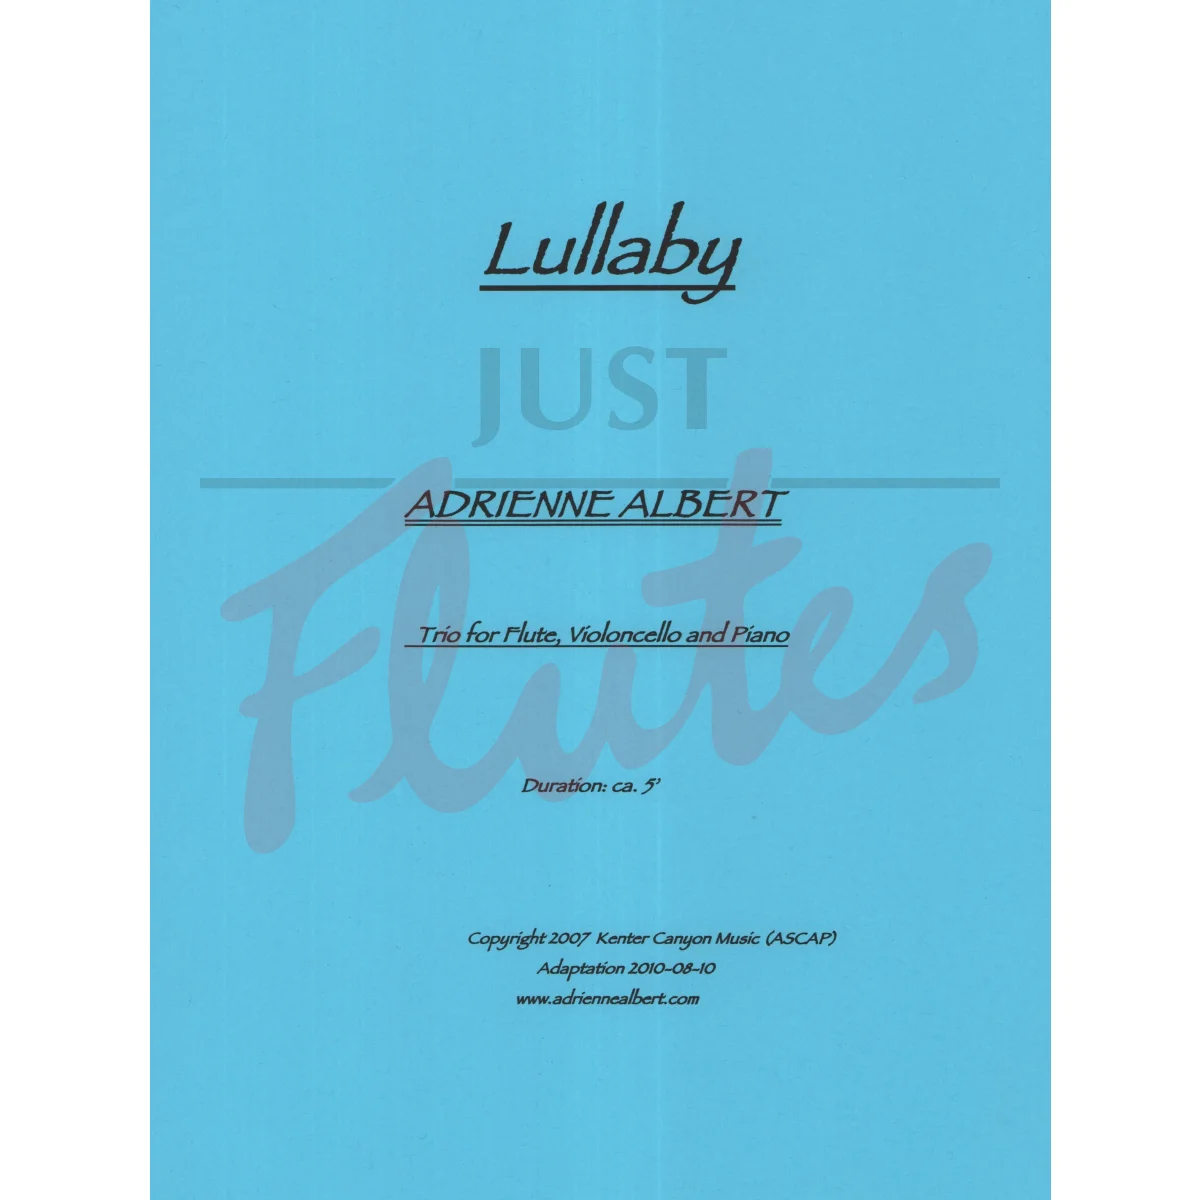 Lullaby for Three for Flute, Cello and Piano